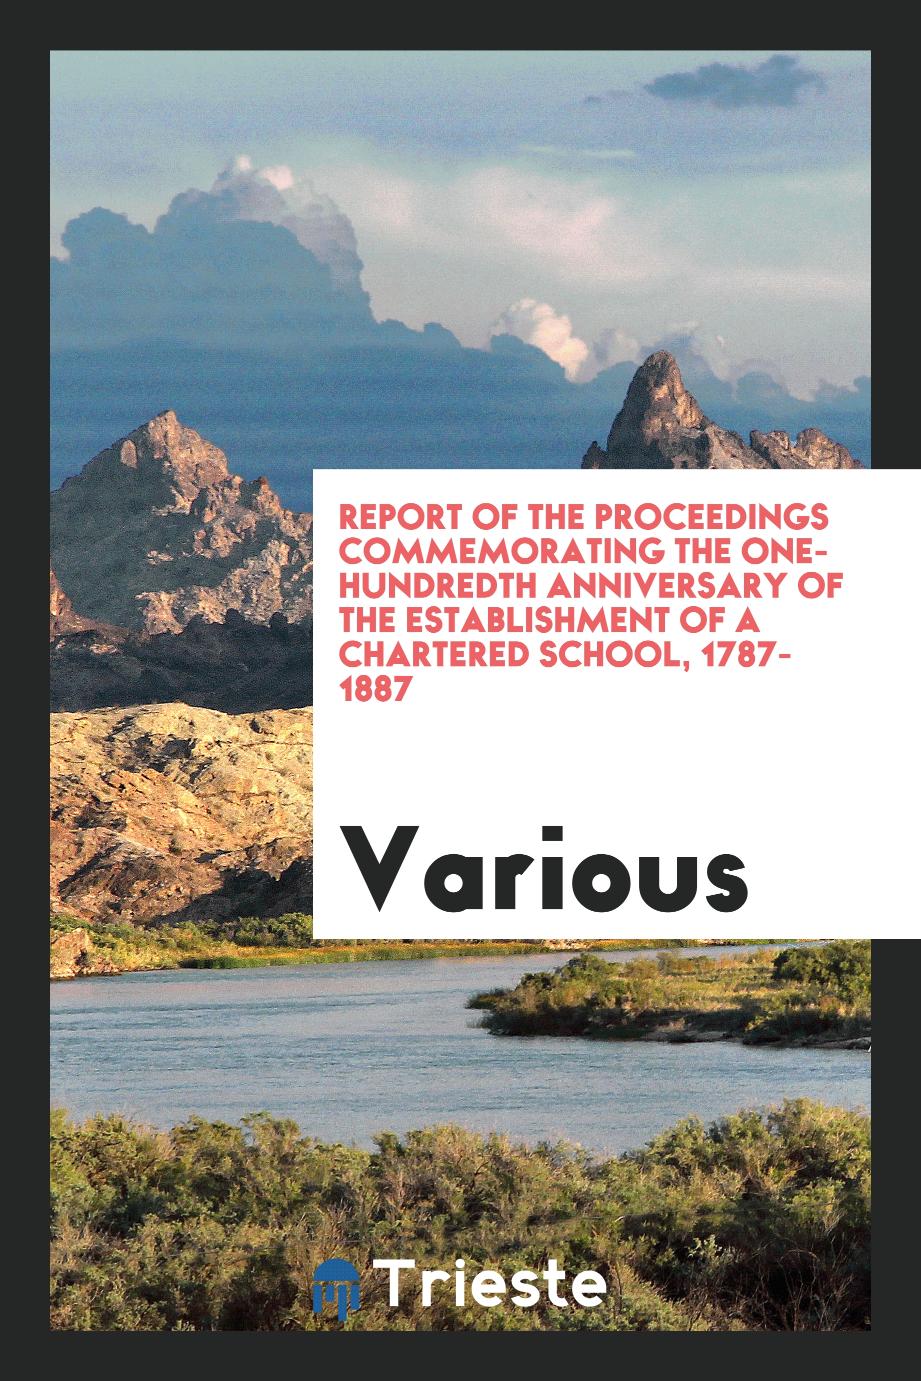 Report of the Proceedings Commemorating the One-Hundredth Anniversary of the Establishment of a Chartered School, 1787-1887